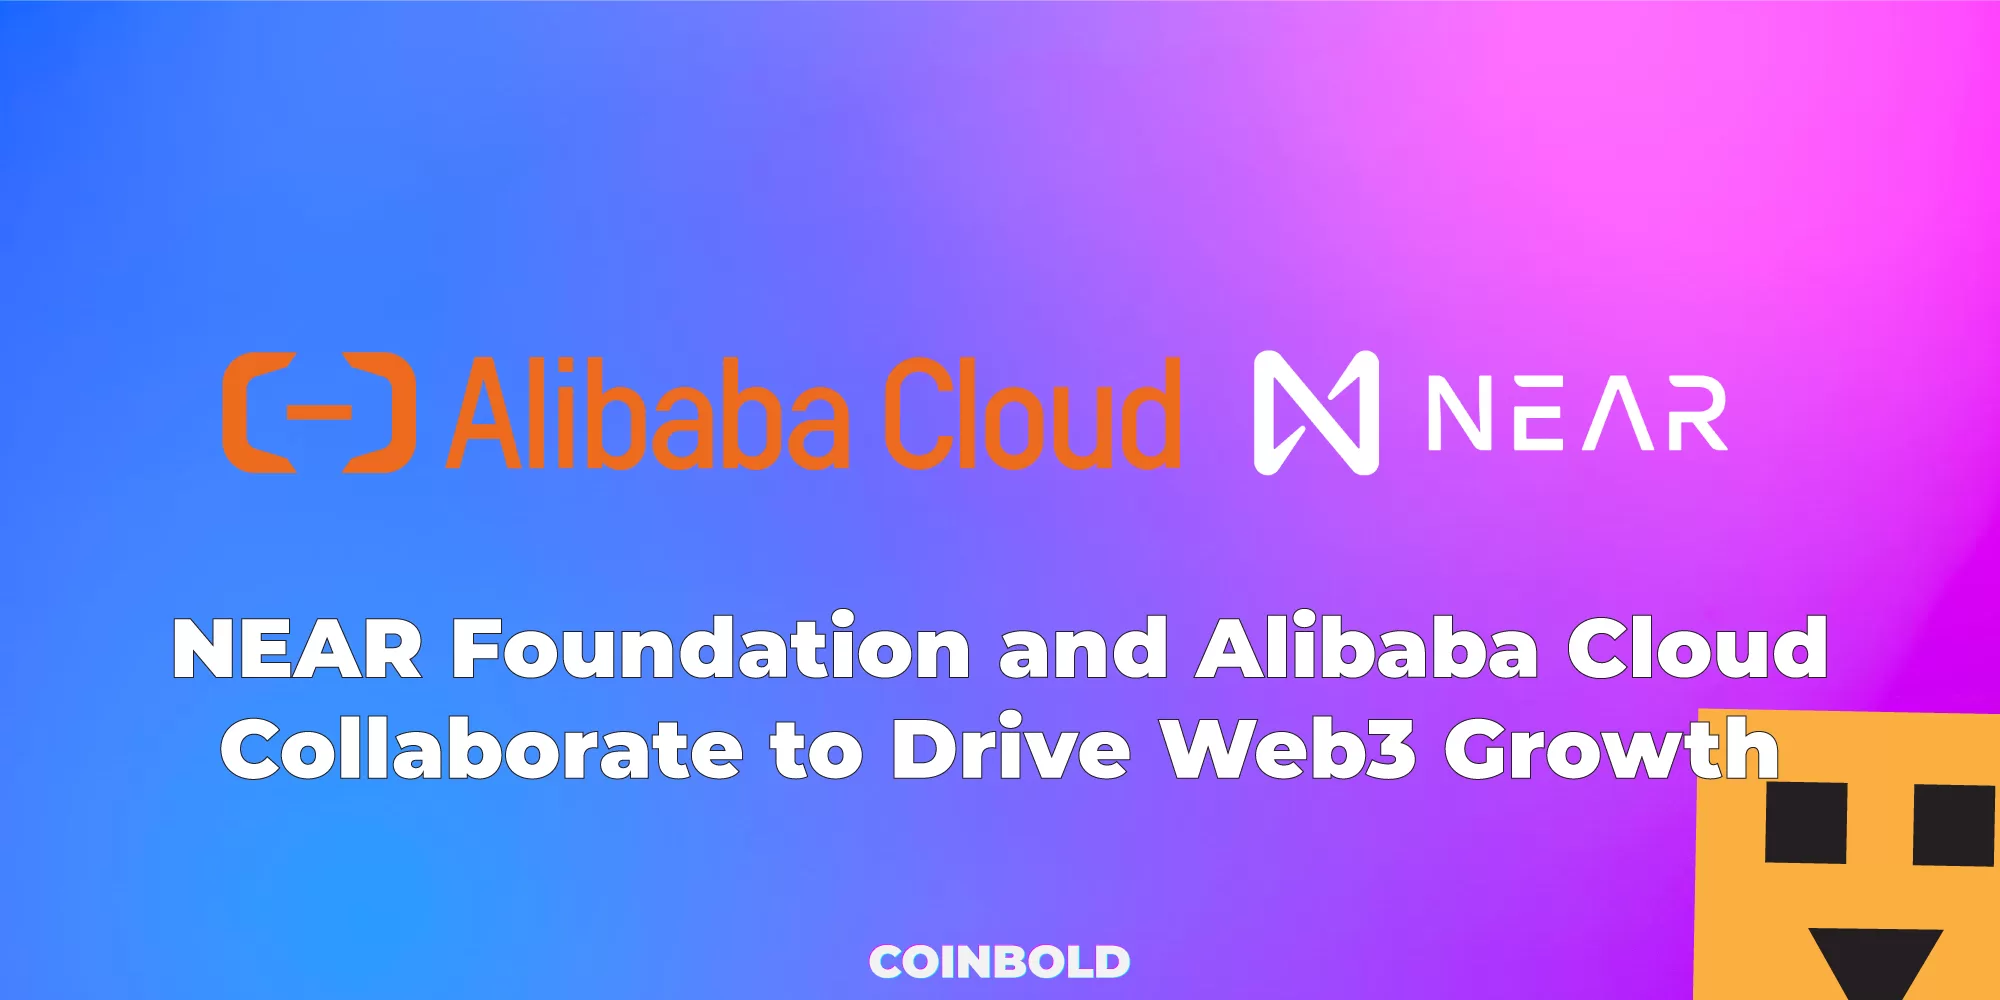 NEAR Foundation and Alibaba Cloud Collaborate to Drive Web3 Growth